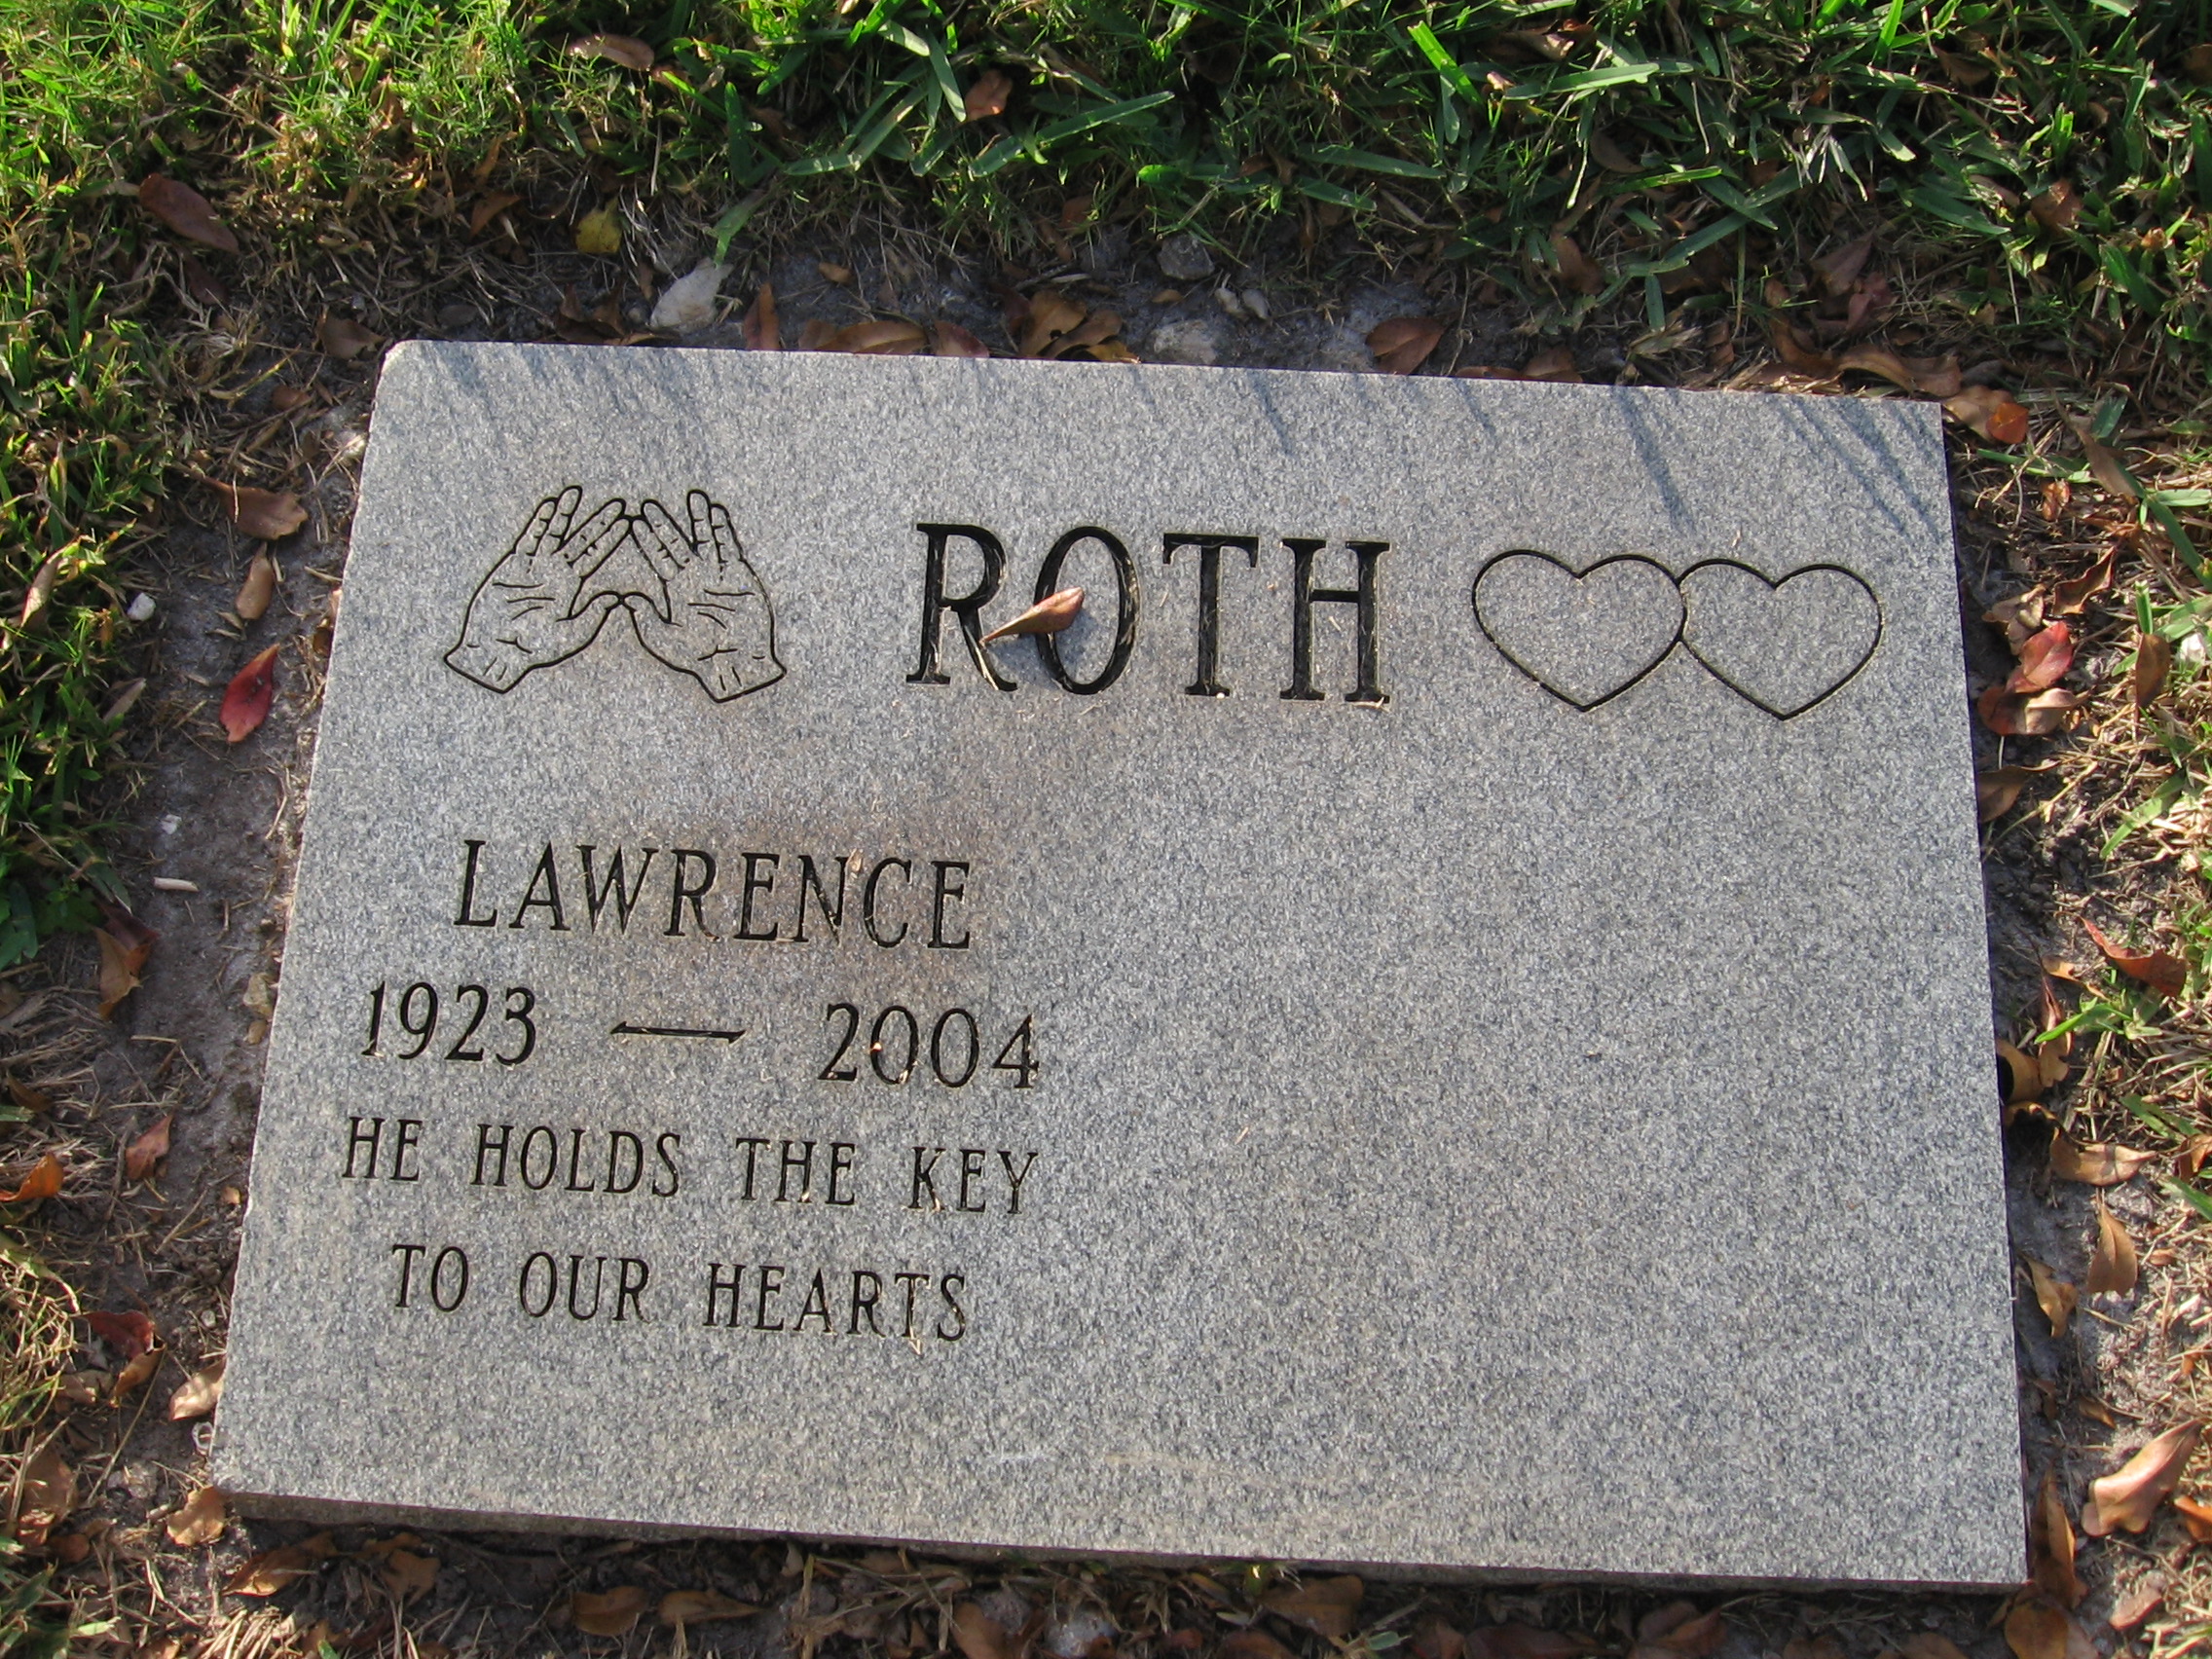 Lawrence Roth